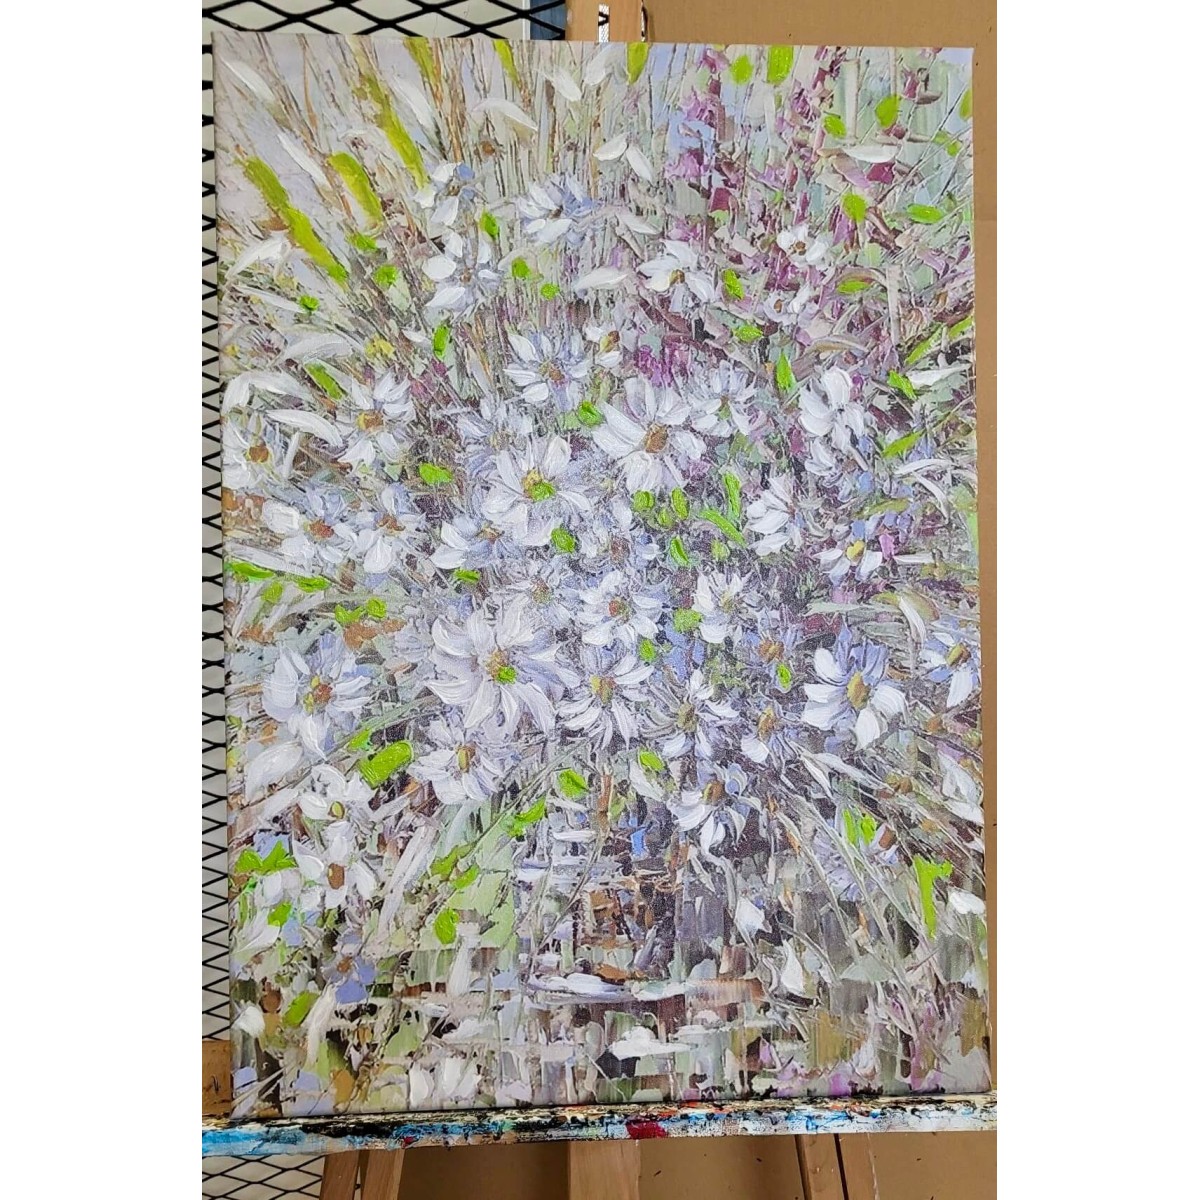 White Little Flowers Textured Partial Oil Painting